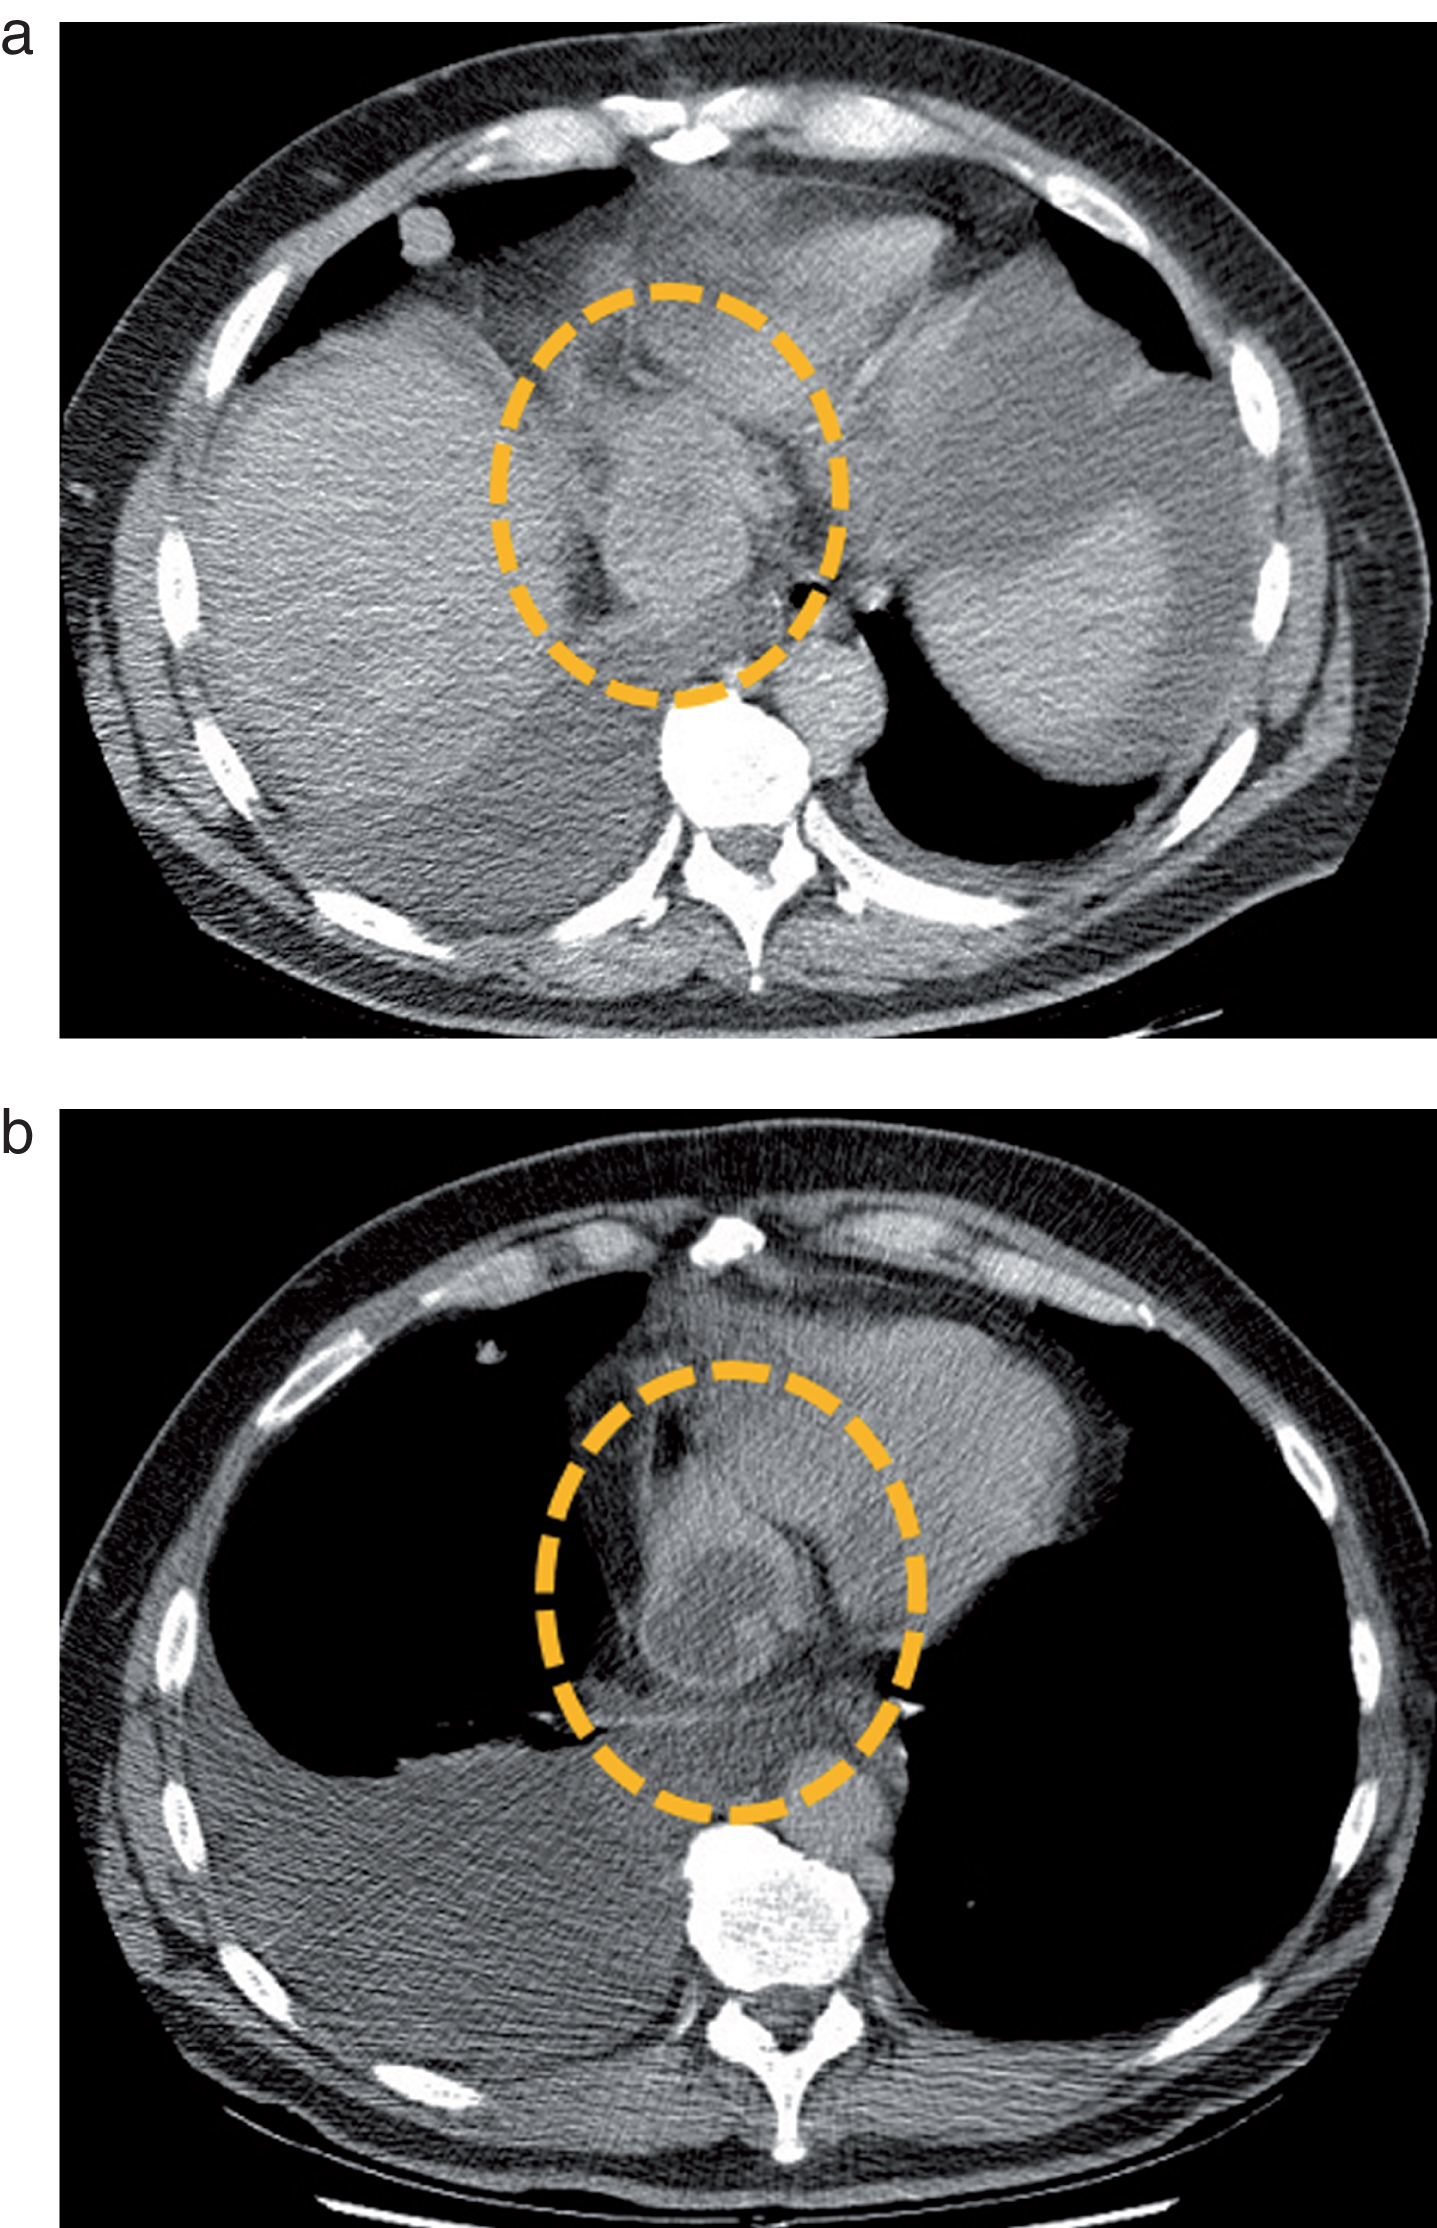 Metastatic mediastinal lymph node of a clear cell RCC before (a) and after (b) a single cycle of treatment by sunitinib. The lymph node (dotted circle) enhances homogeneously before therapy, but presents a central devascularized portion after treatment administration. Based on these observations, several teams tested Choi criteria in mRCC.